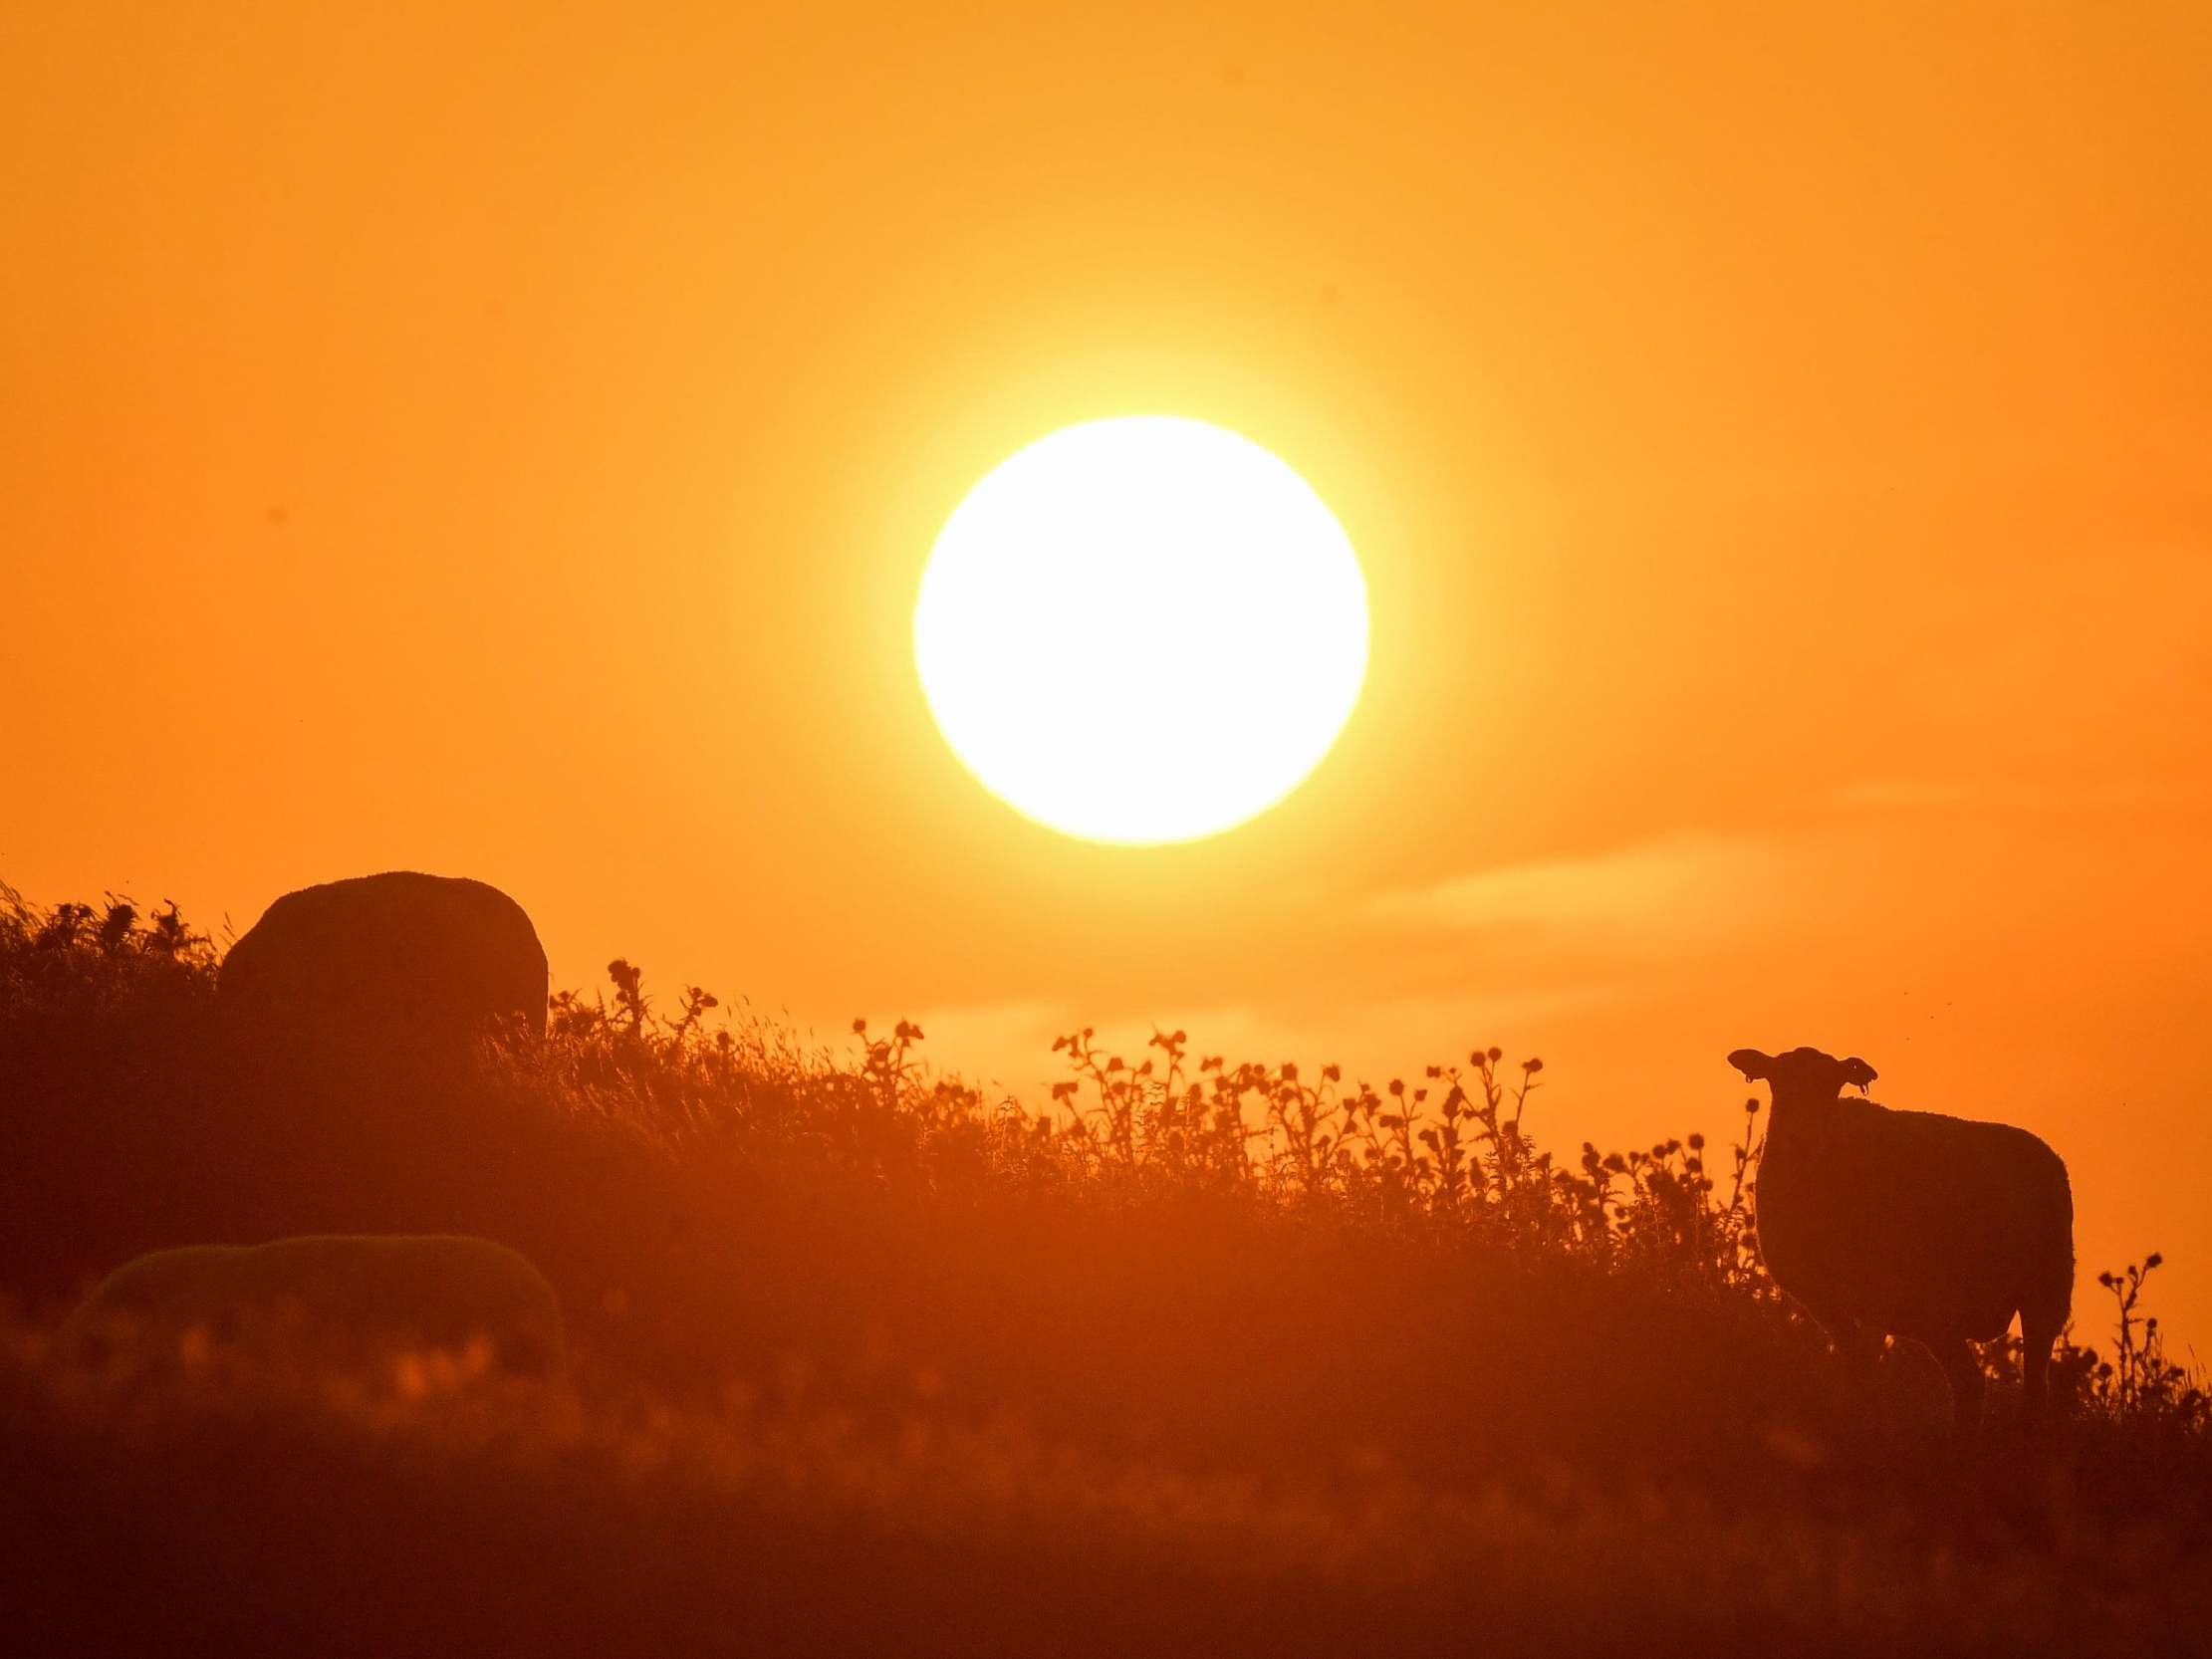 Last month was joint-hottest May since records began - The Independent